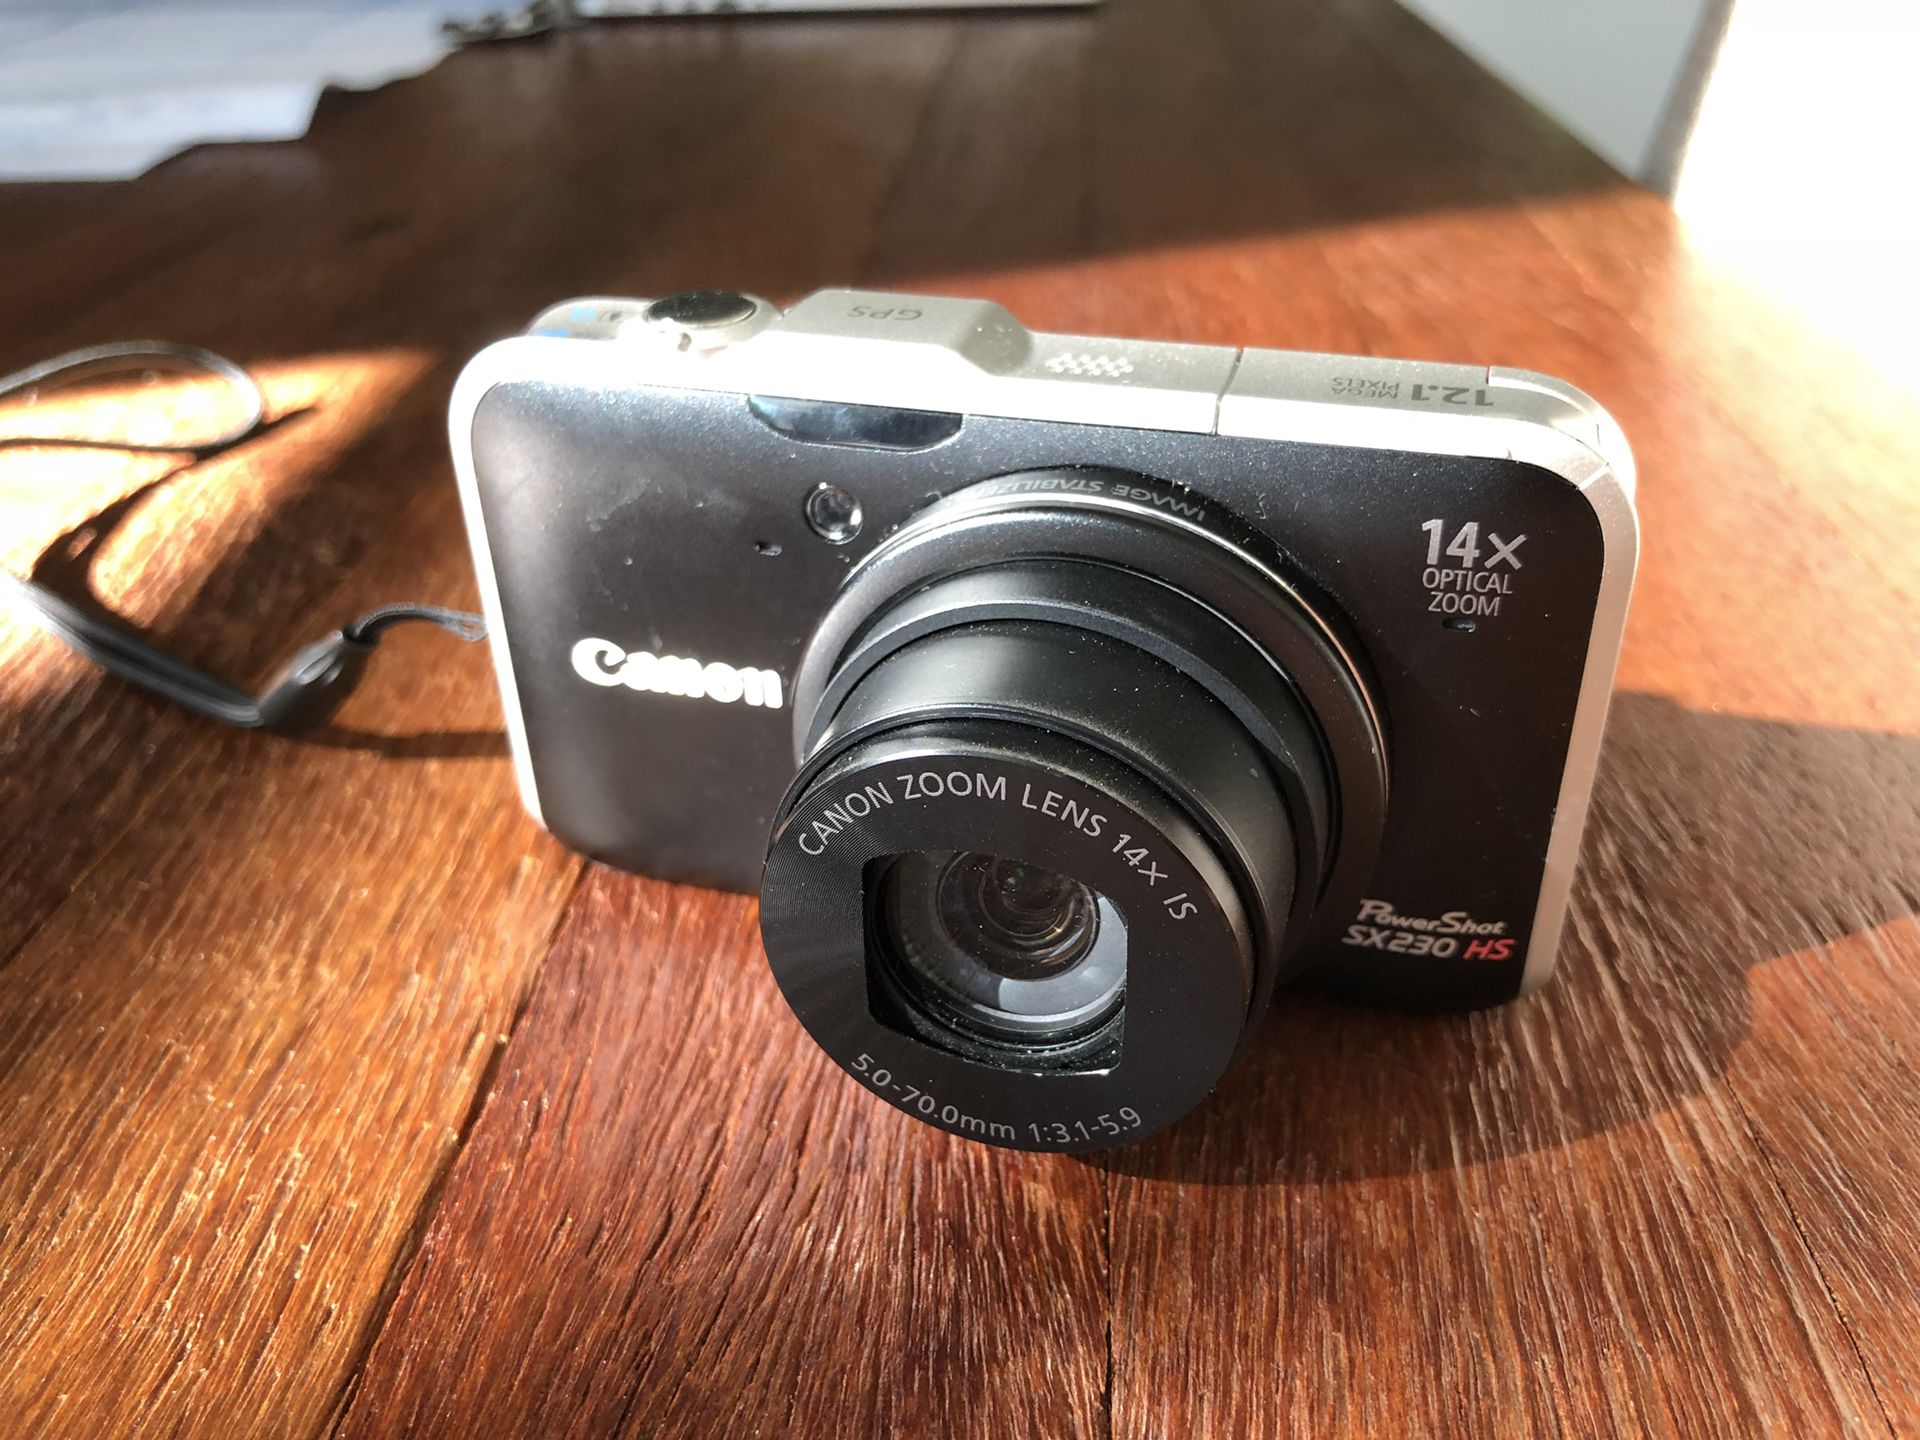 Canon PowerShot SX230 HS 12.1 MP CMOS Digital Camera with 14x Zoom, Full HD Video, case and extra battery included